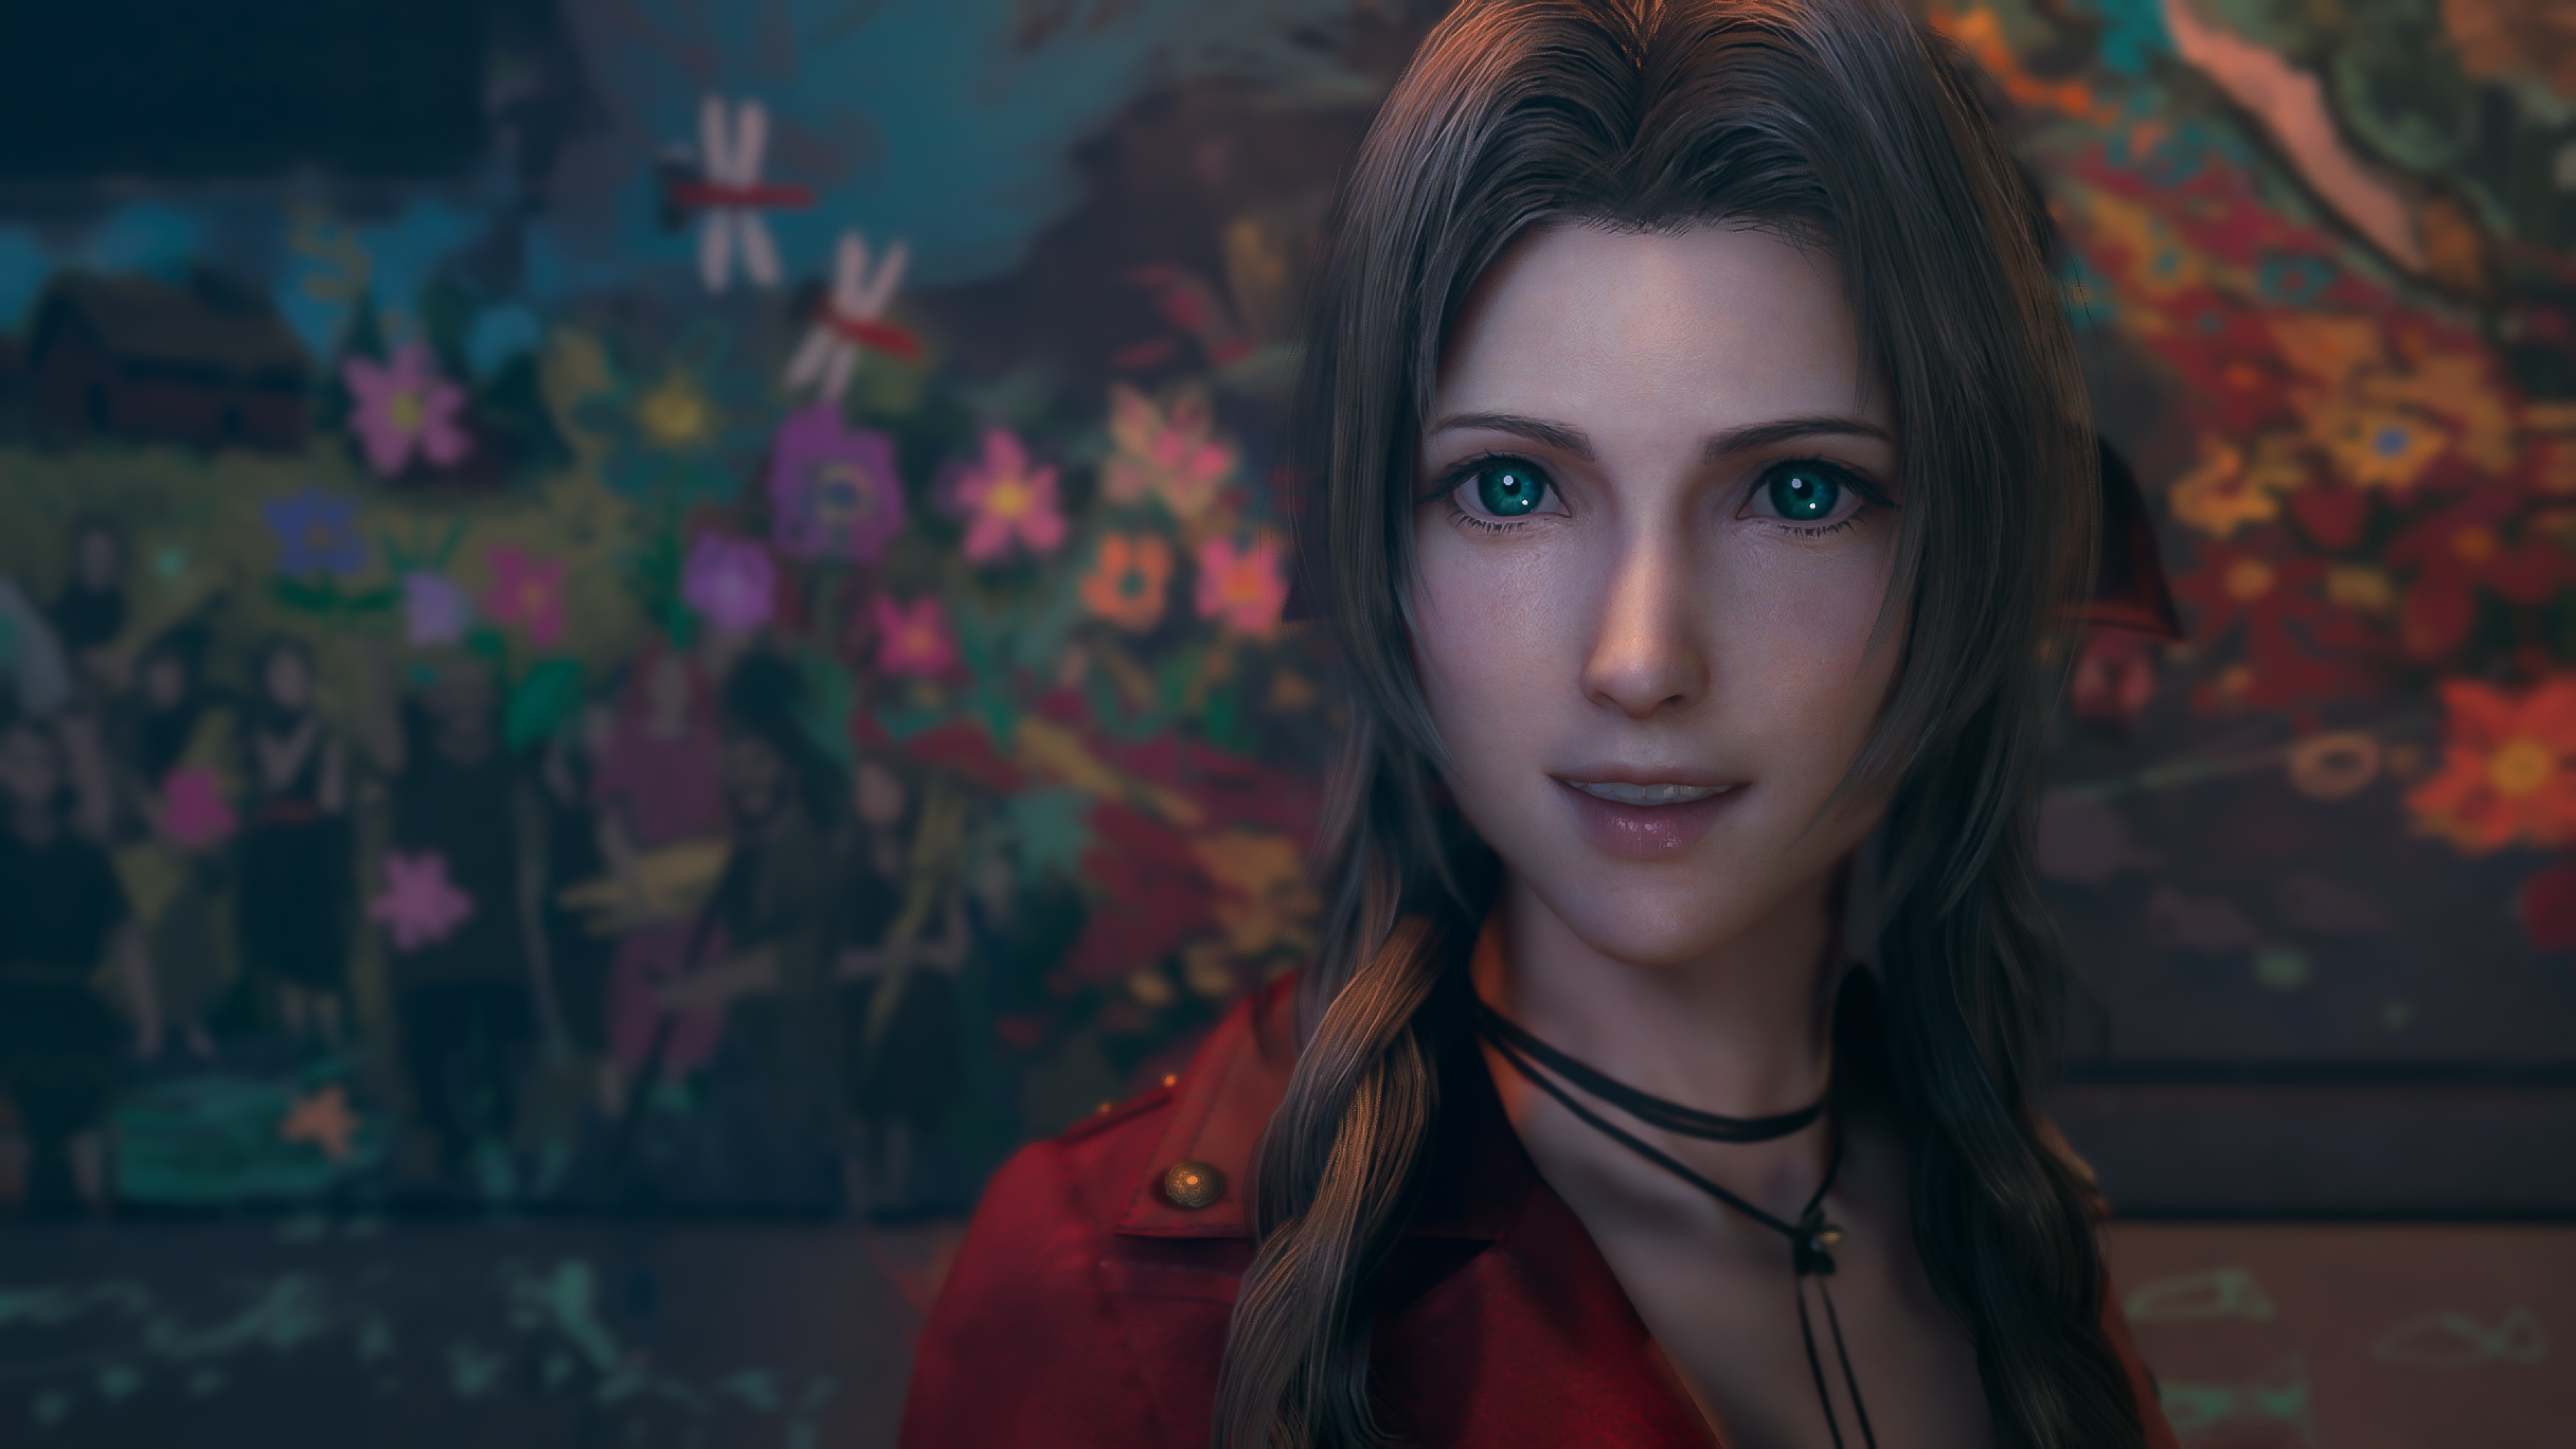 Final Fantasy Vii Remake Image Id 355165 Image Abyss 